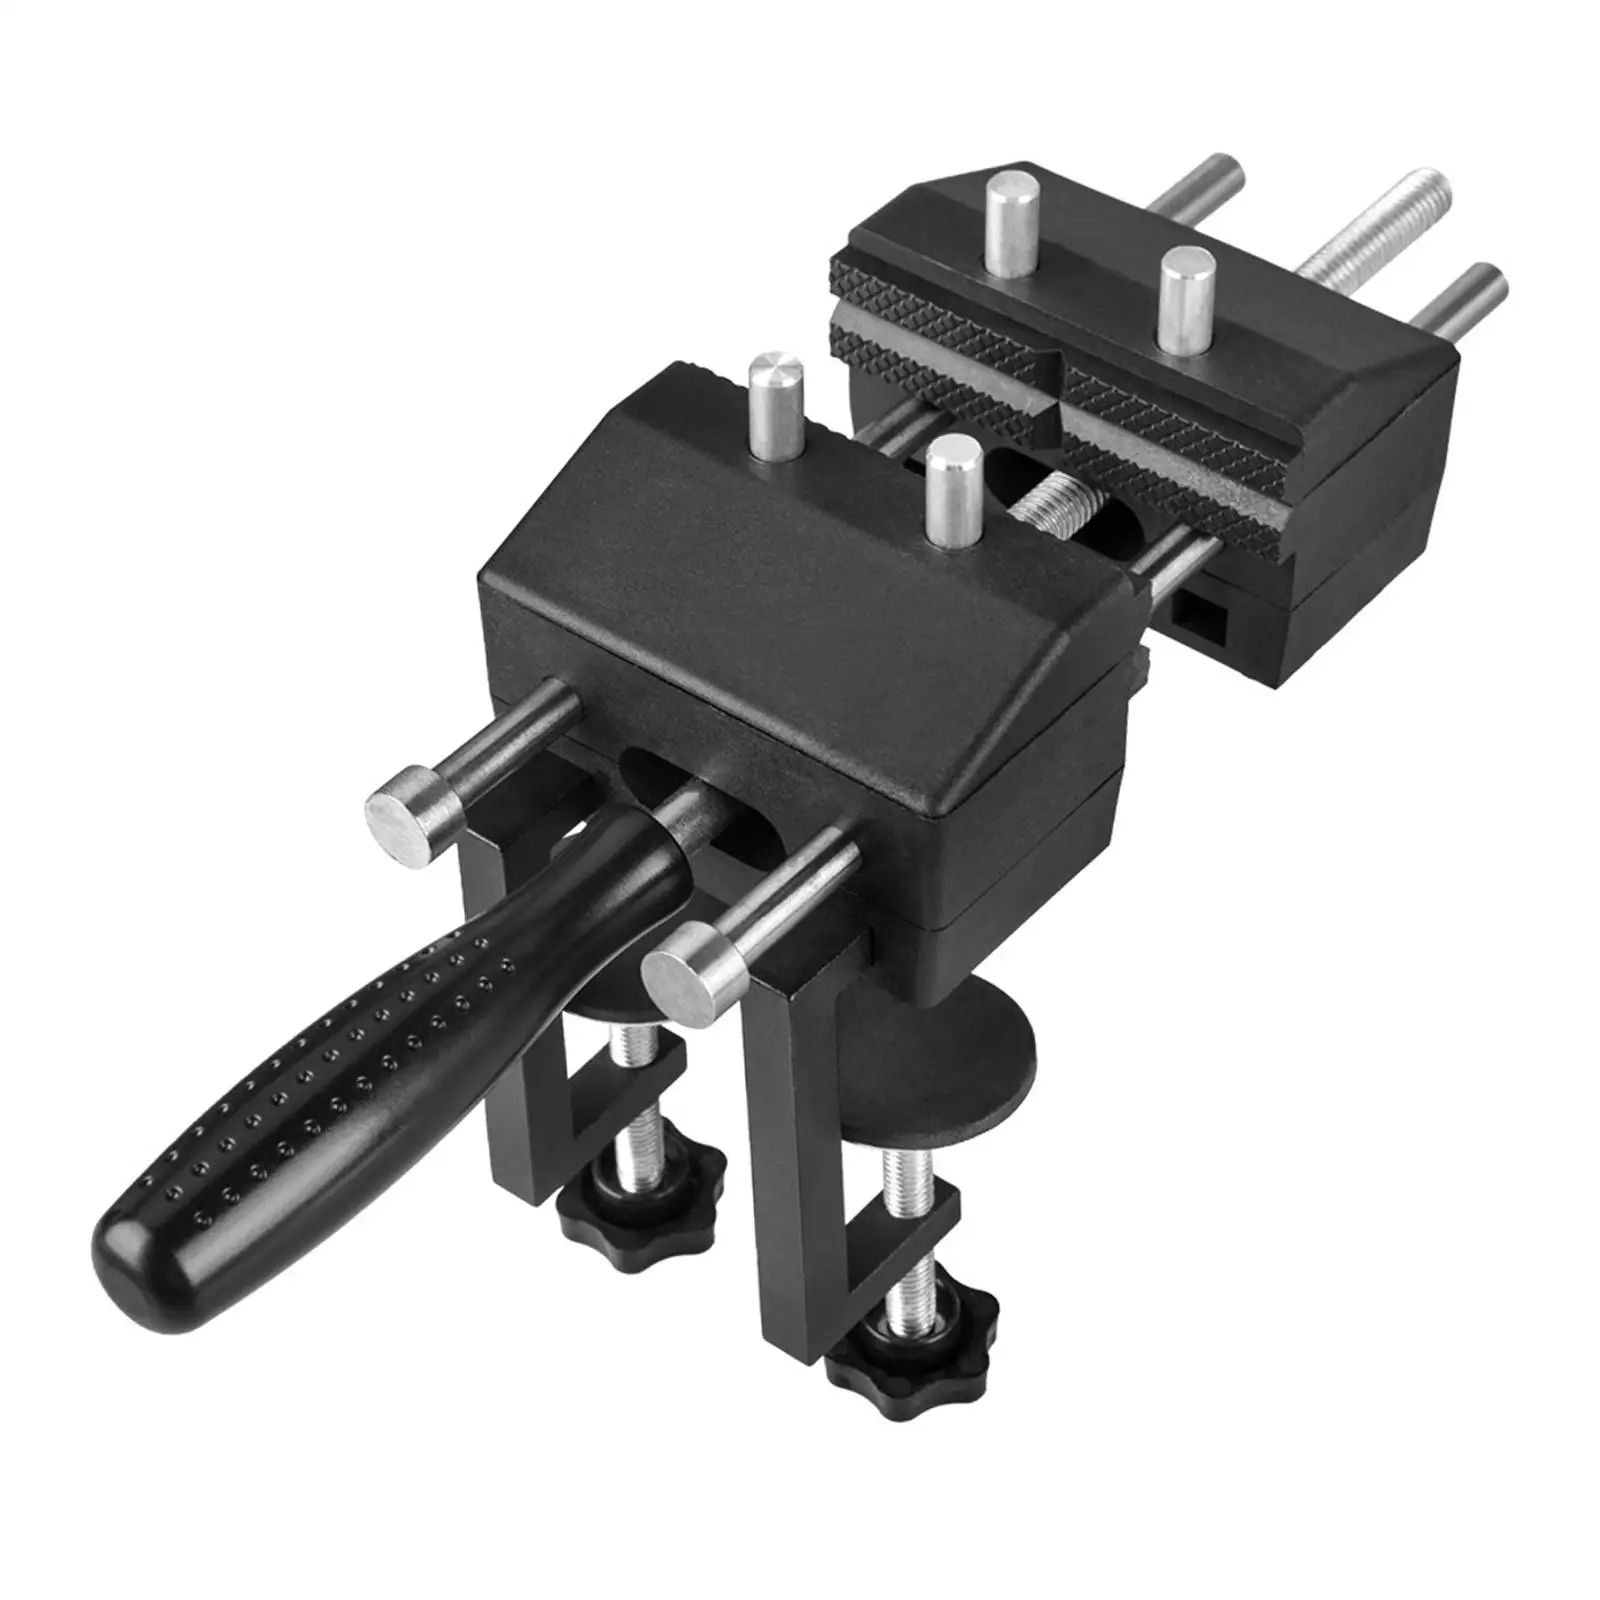 Table Vice Clamp with Swivel Base Heavy Duty Bench Vise Clamp for Woodworking DIY Projects Sawing Metalworking Accessories